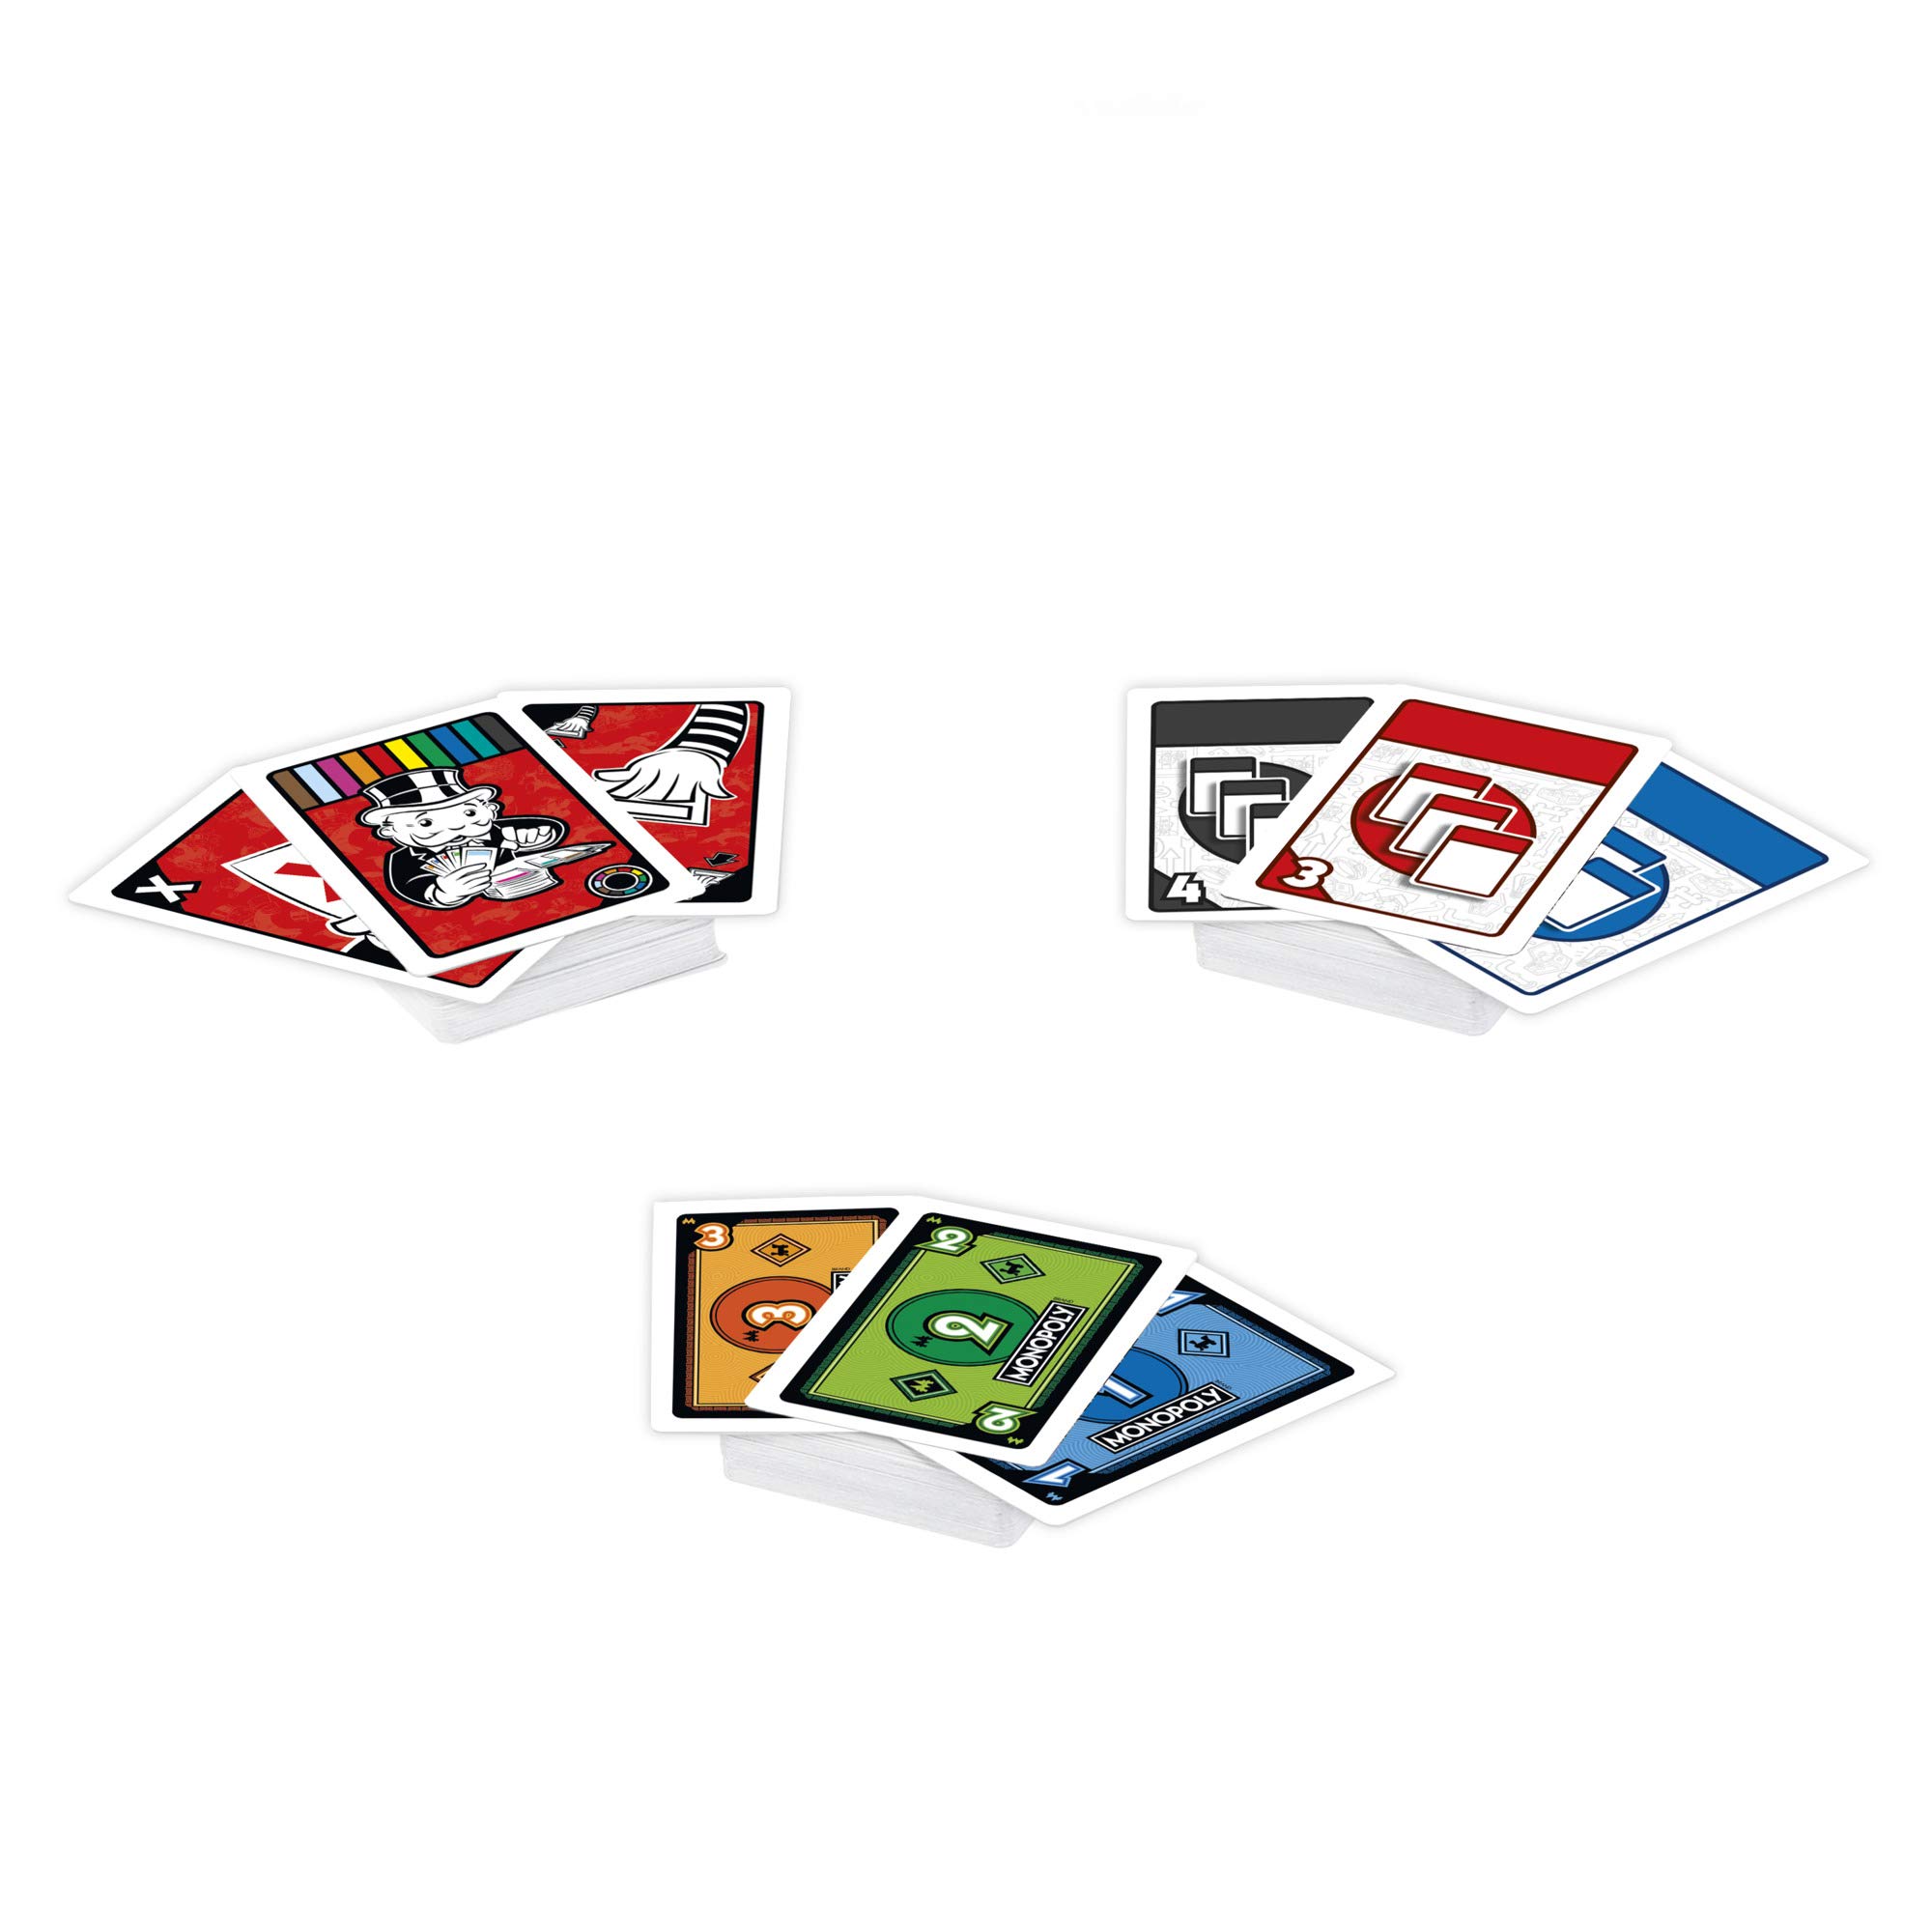 Monopoly Bid Game, Quick-Playing Card Game for 4 Players, Game for Families and Kids Ages 7 and Up